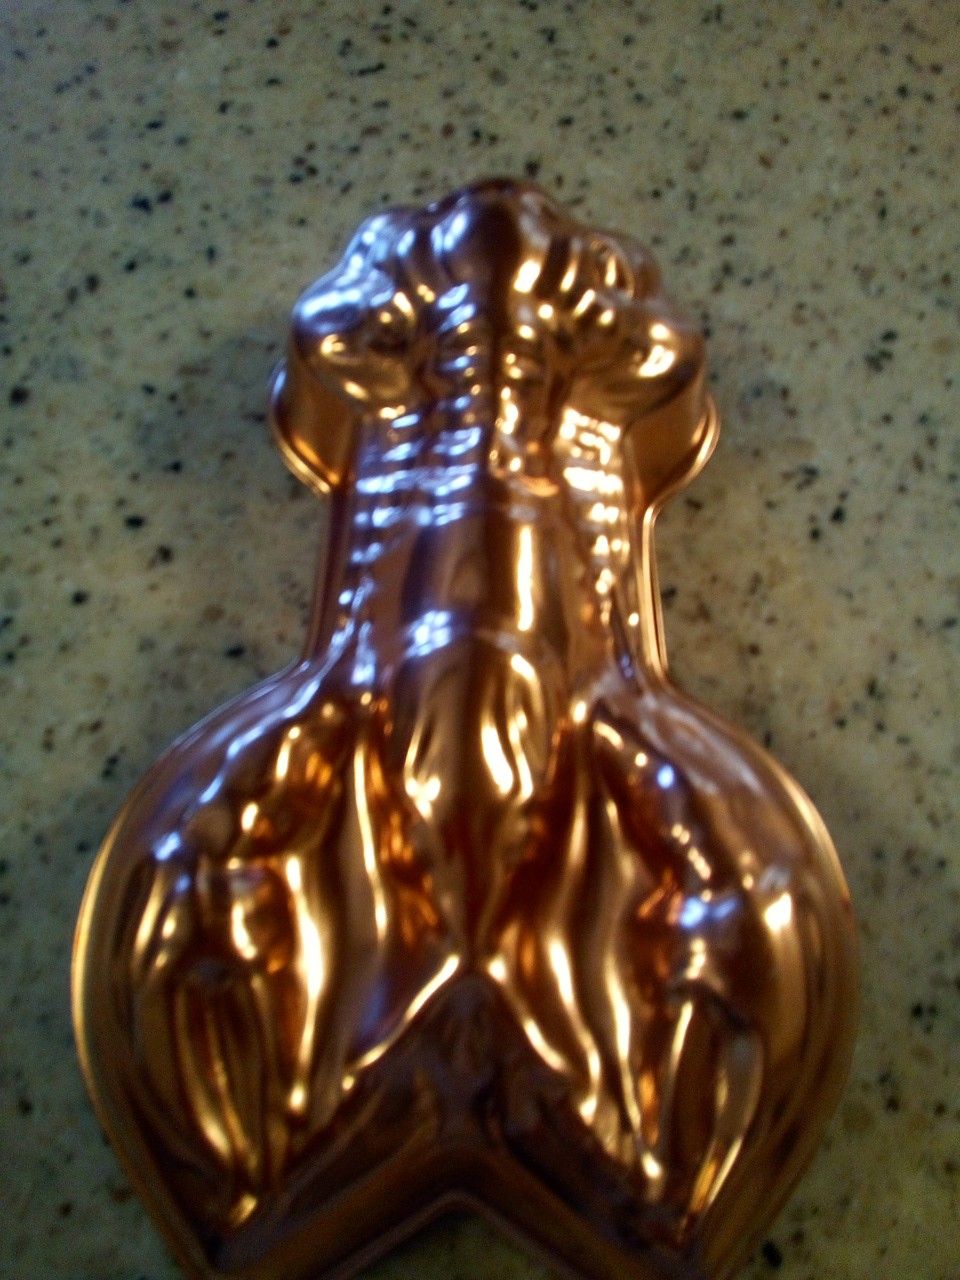 Vintage copper lobster jello mold/3.5 cup capacity/10x7 inches/ wall hanging or use for jello